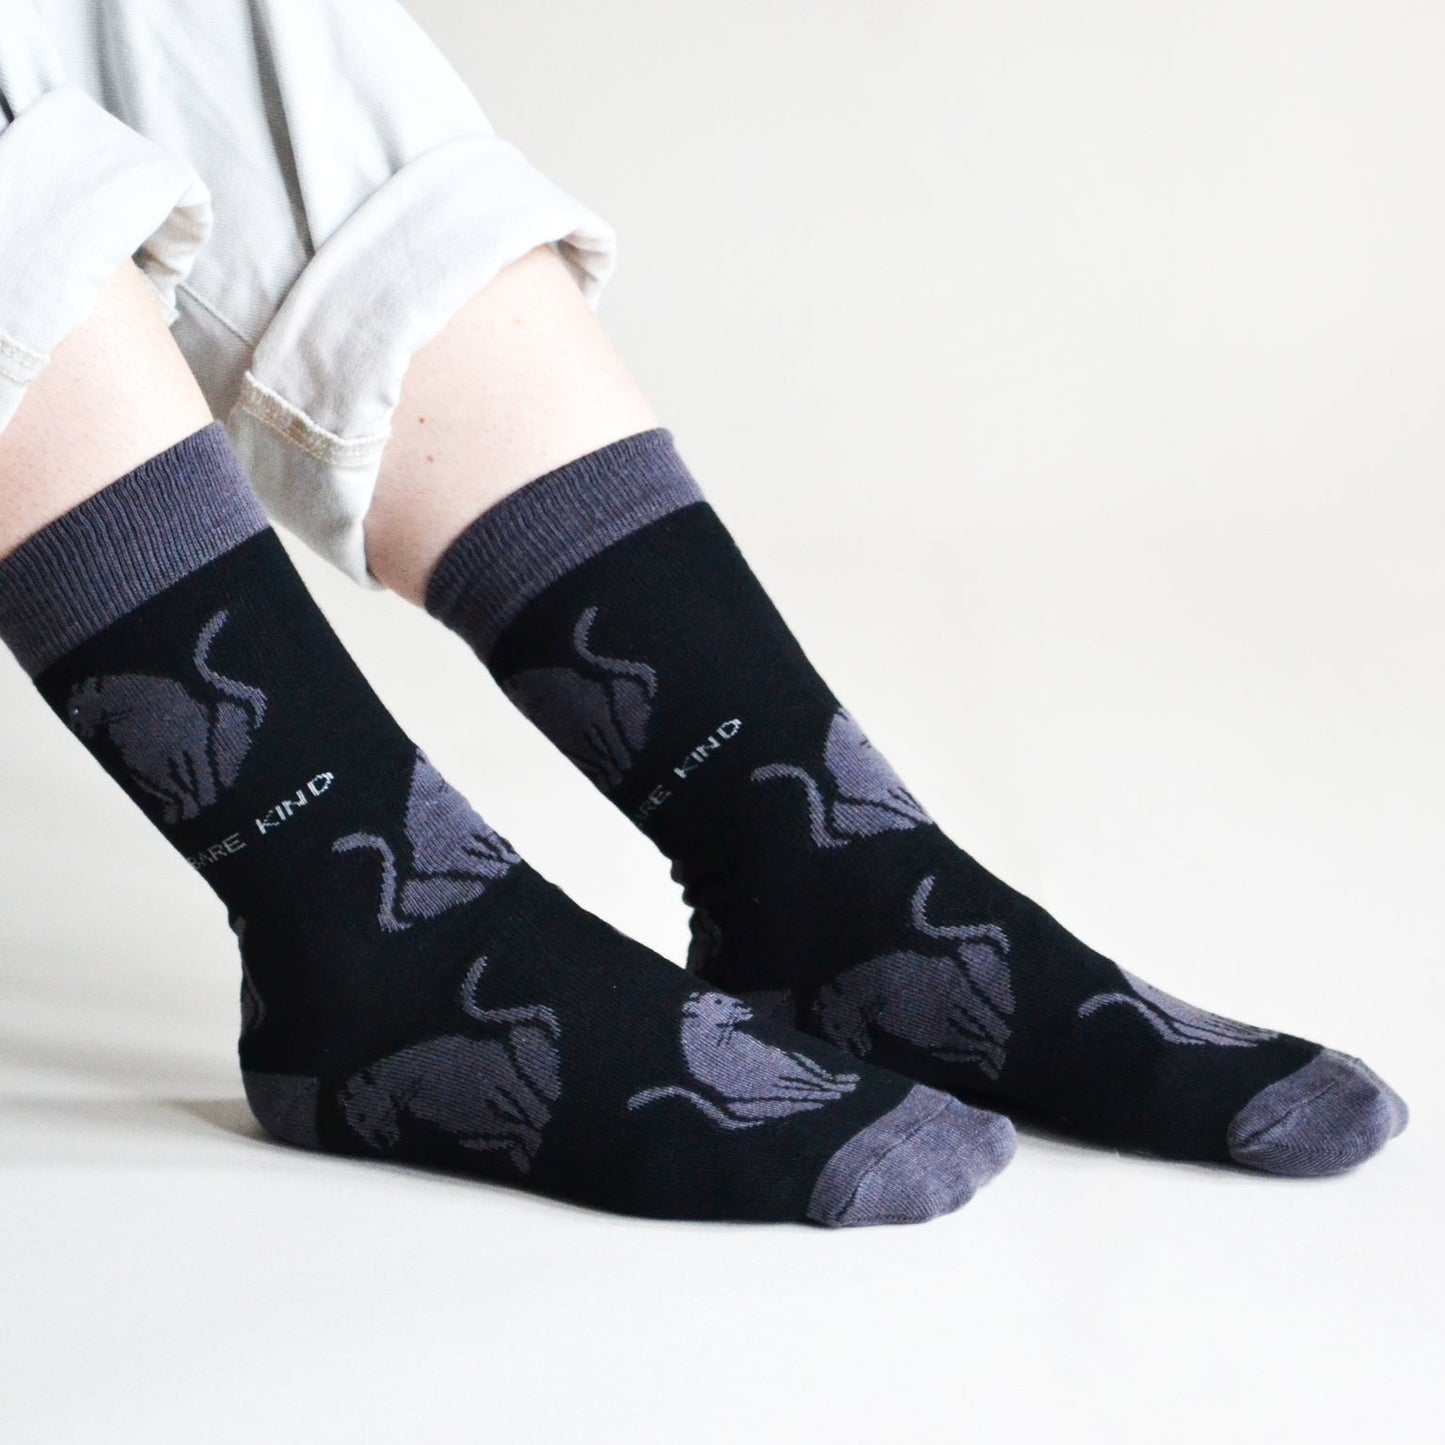 Bare Kind Bamboo Socks - Save the Black Panther